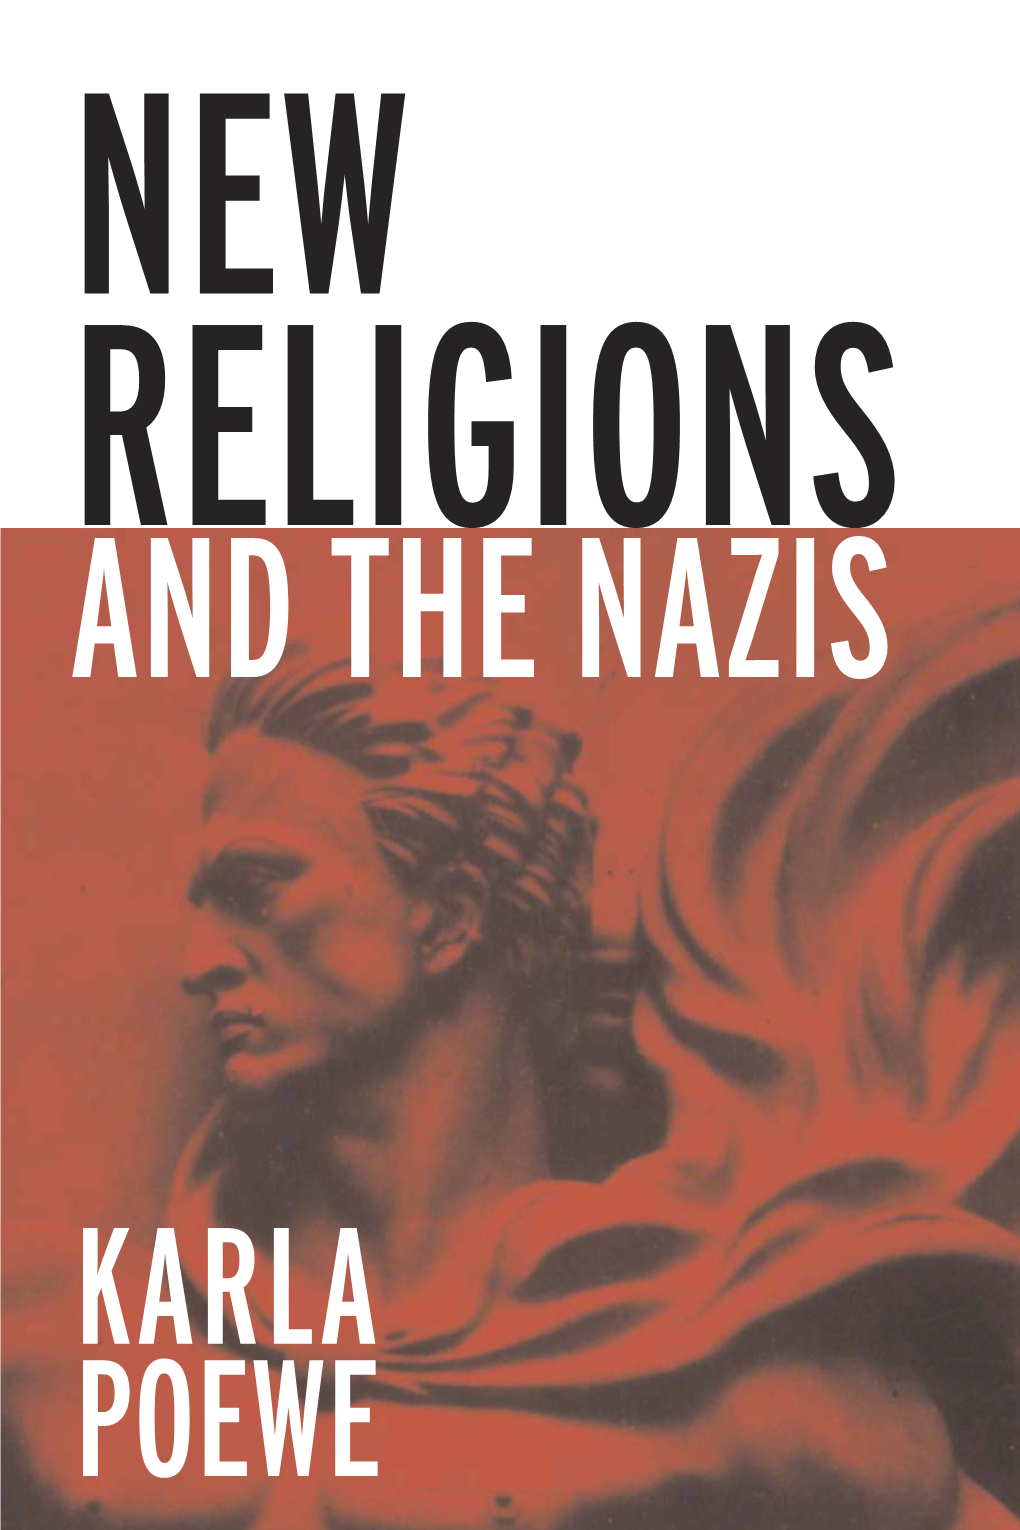 New Religions and the Nazis